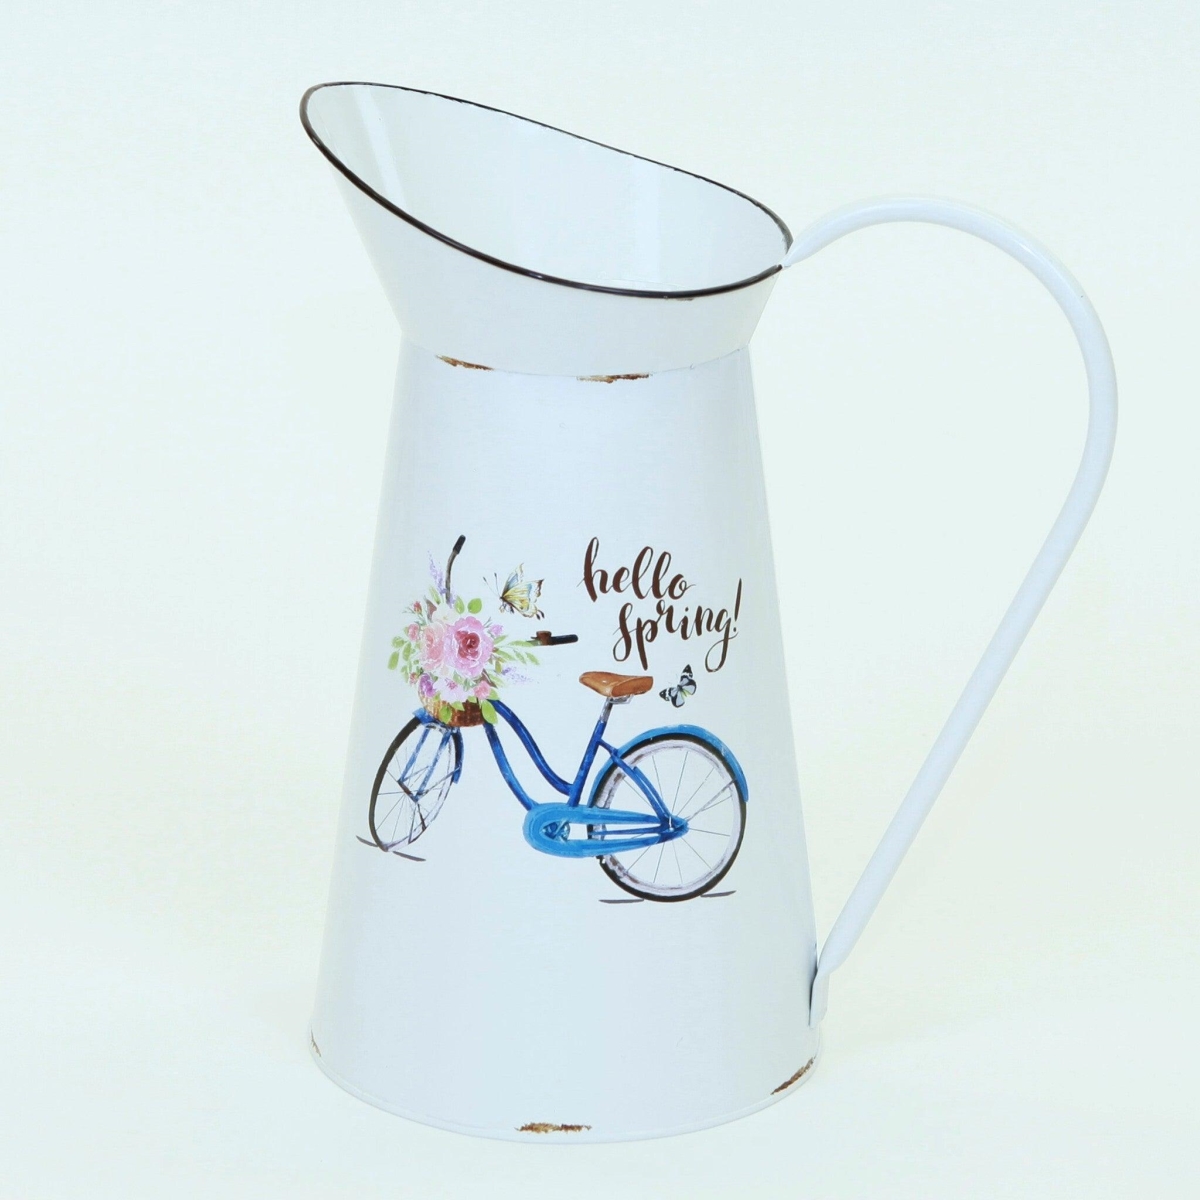 MDR Trading AI-GA93-428-Q04 Hello Spring White & Blue Bike with Flowers on a Metal Pitcher - Set of 4